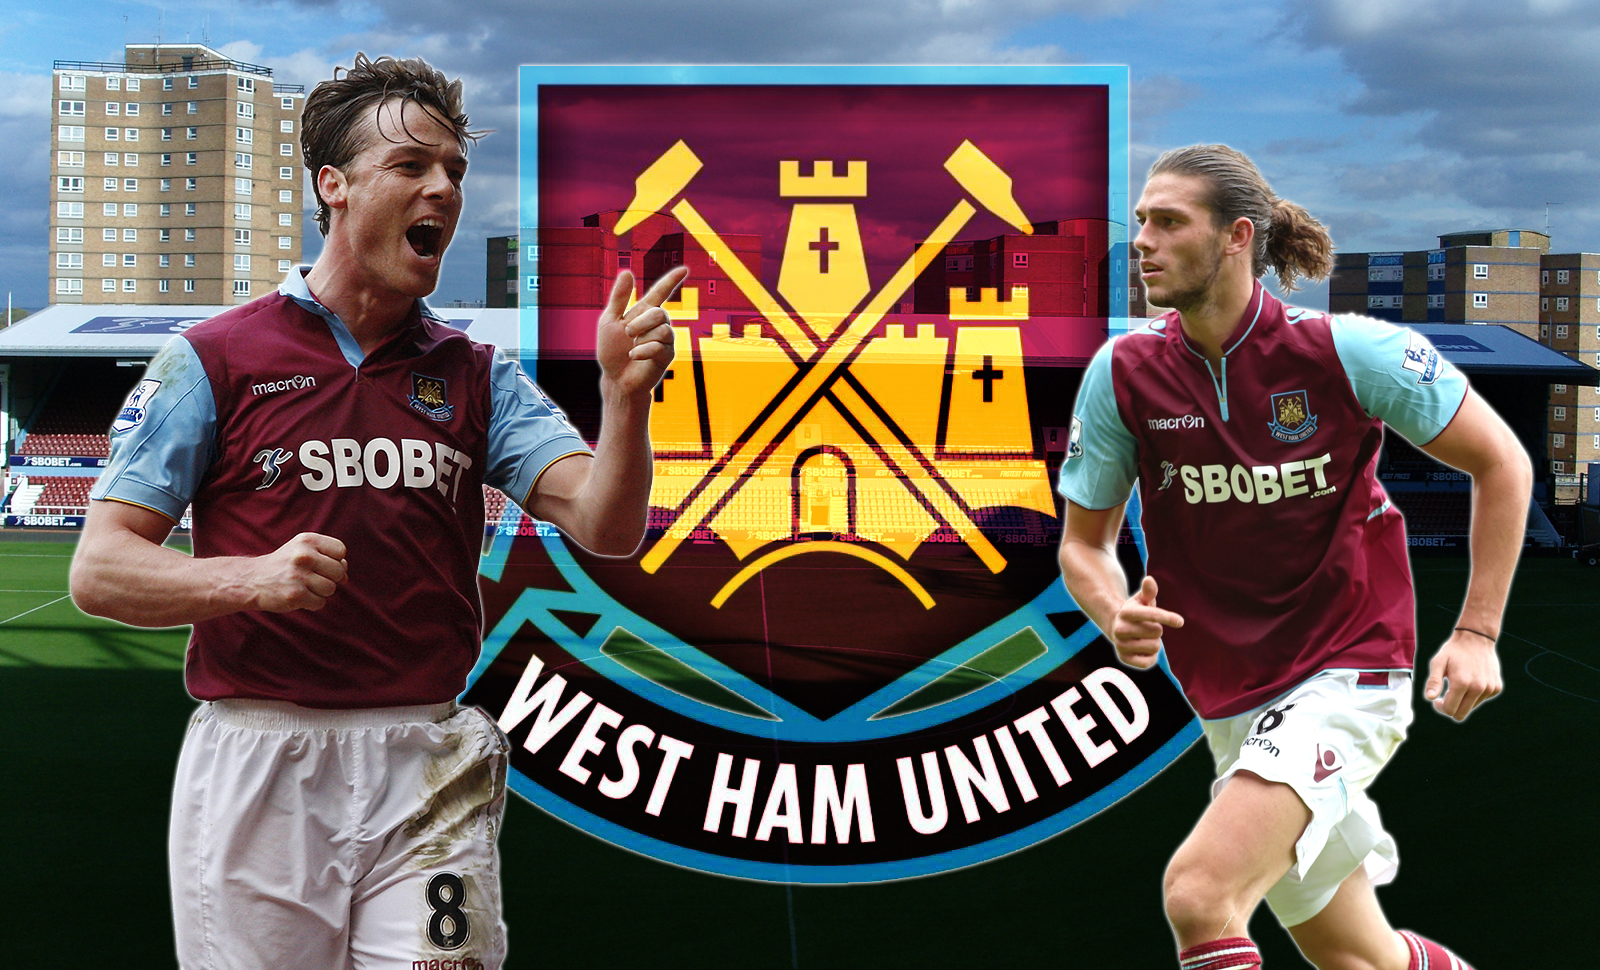 The Best West Ham United Wallpaper Ever